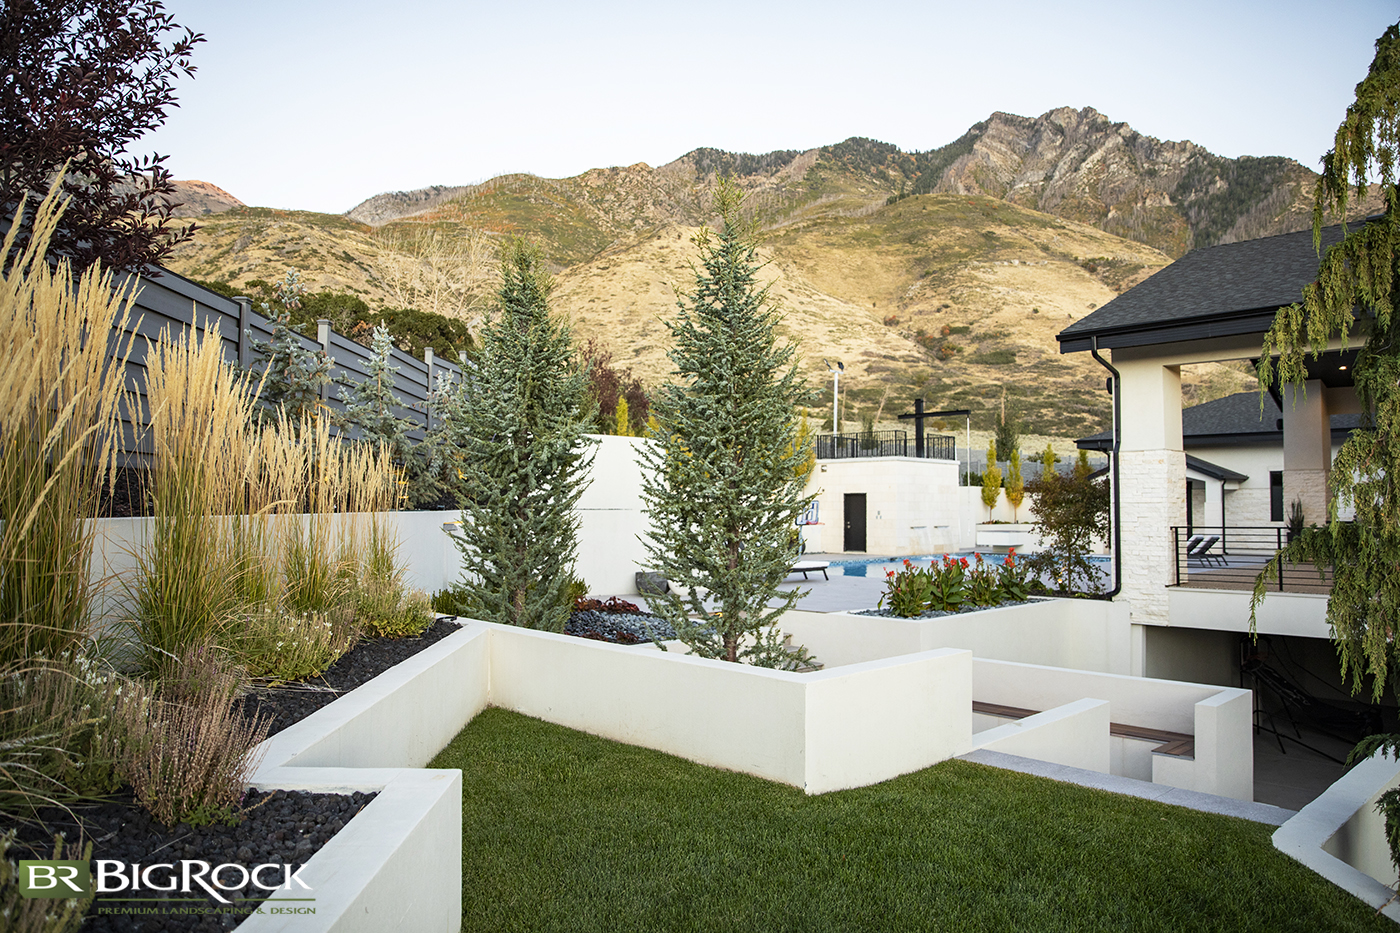 Big Rock Premium Landscaping and Design are master landscapers. Our luxury backyard landscaping designs deliver incredible results and memorable experiences for all our clients.